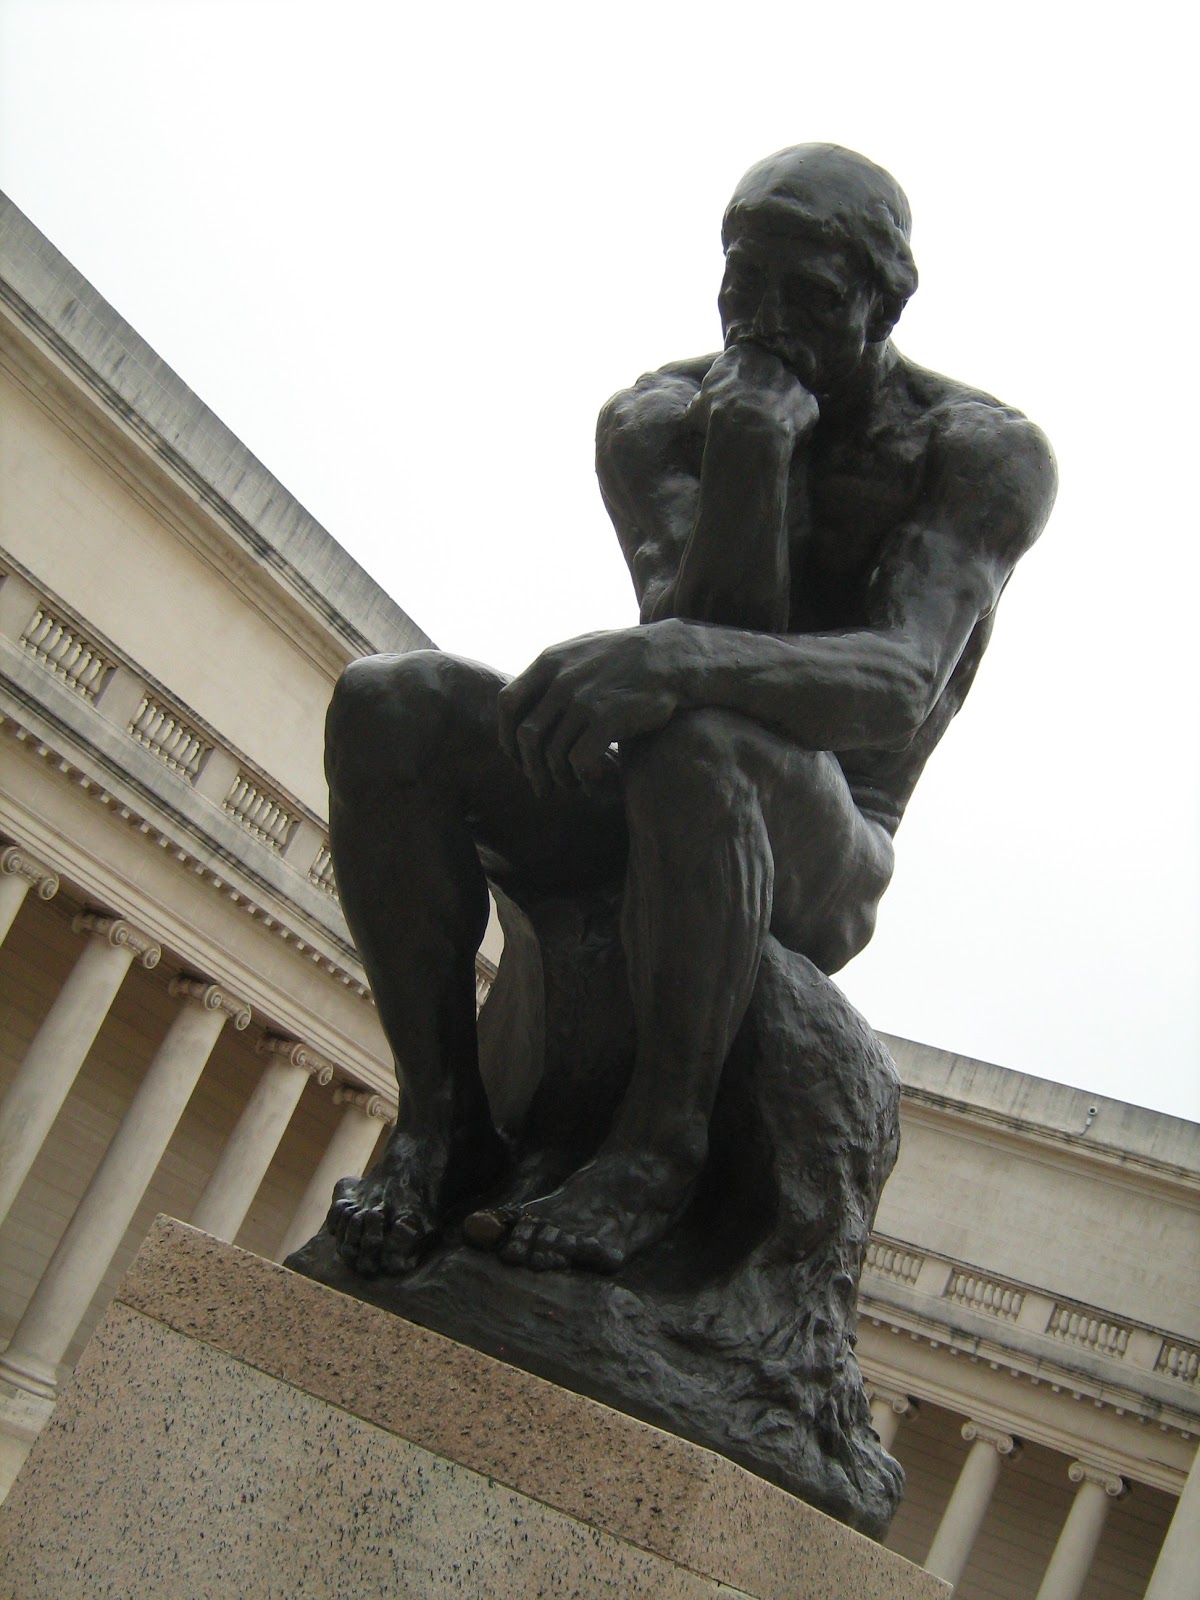 Vicious Imagery: Thinking of you on your birthday, Auguste Rodin